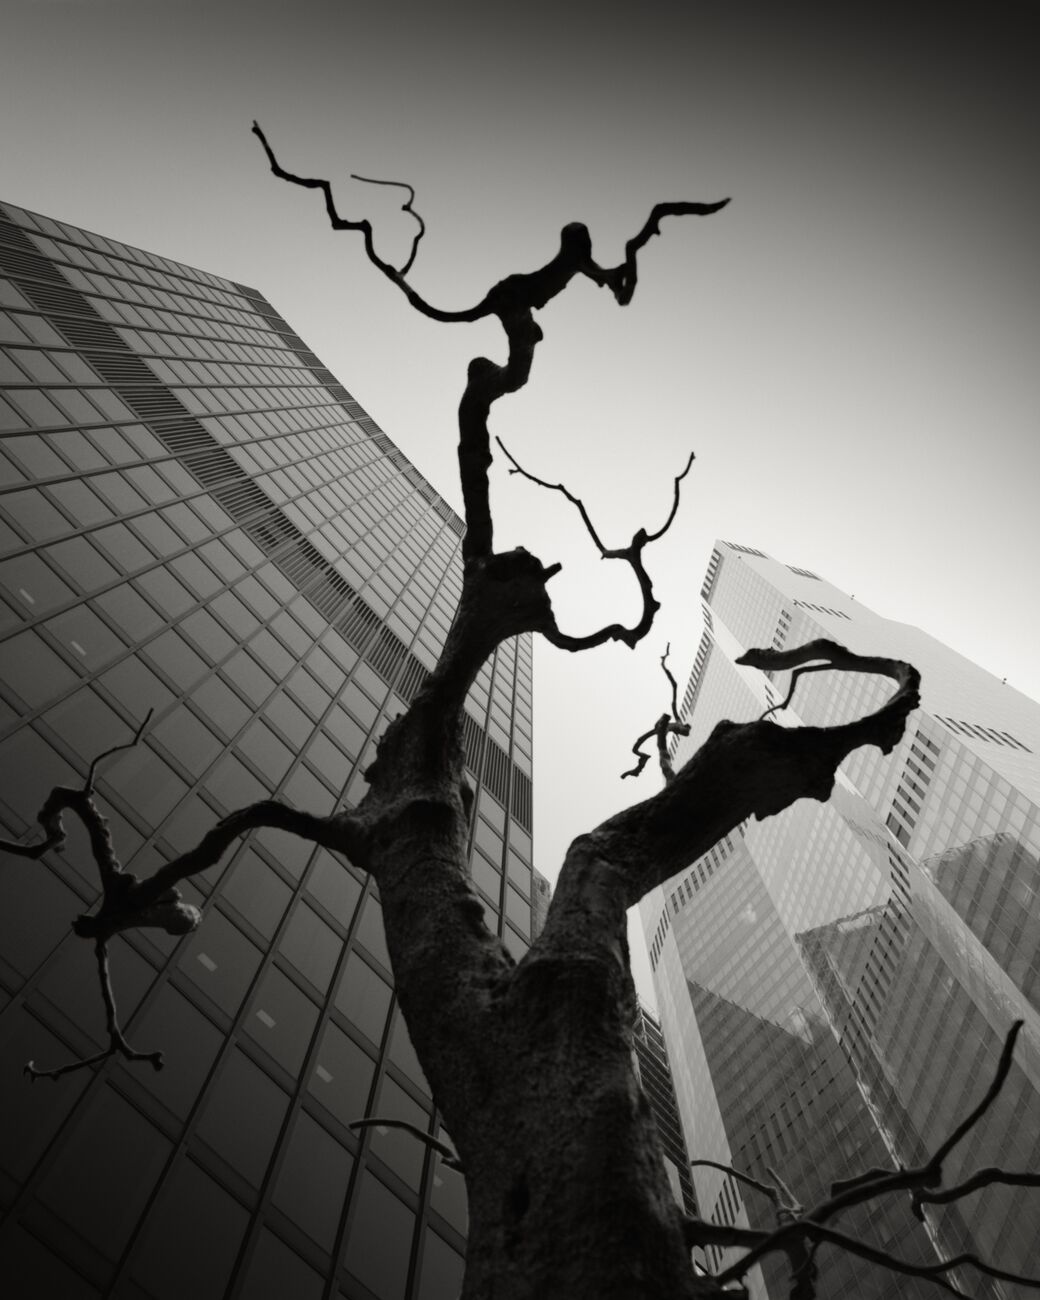 Dead Tree, The City, London, England. August 2022. Ref-11633 - Denis Olivier Art Photography